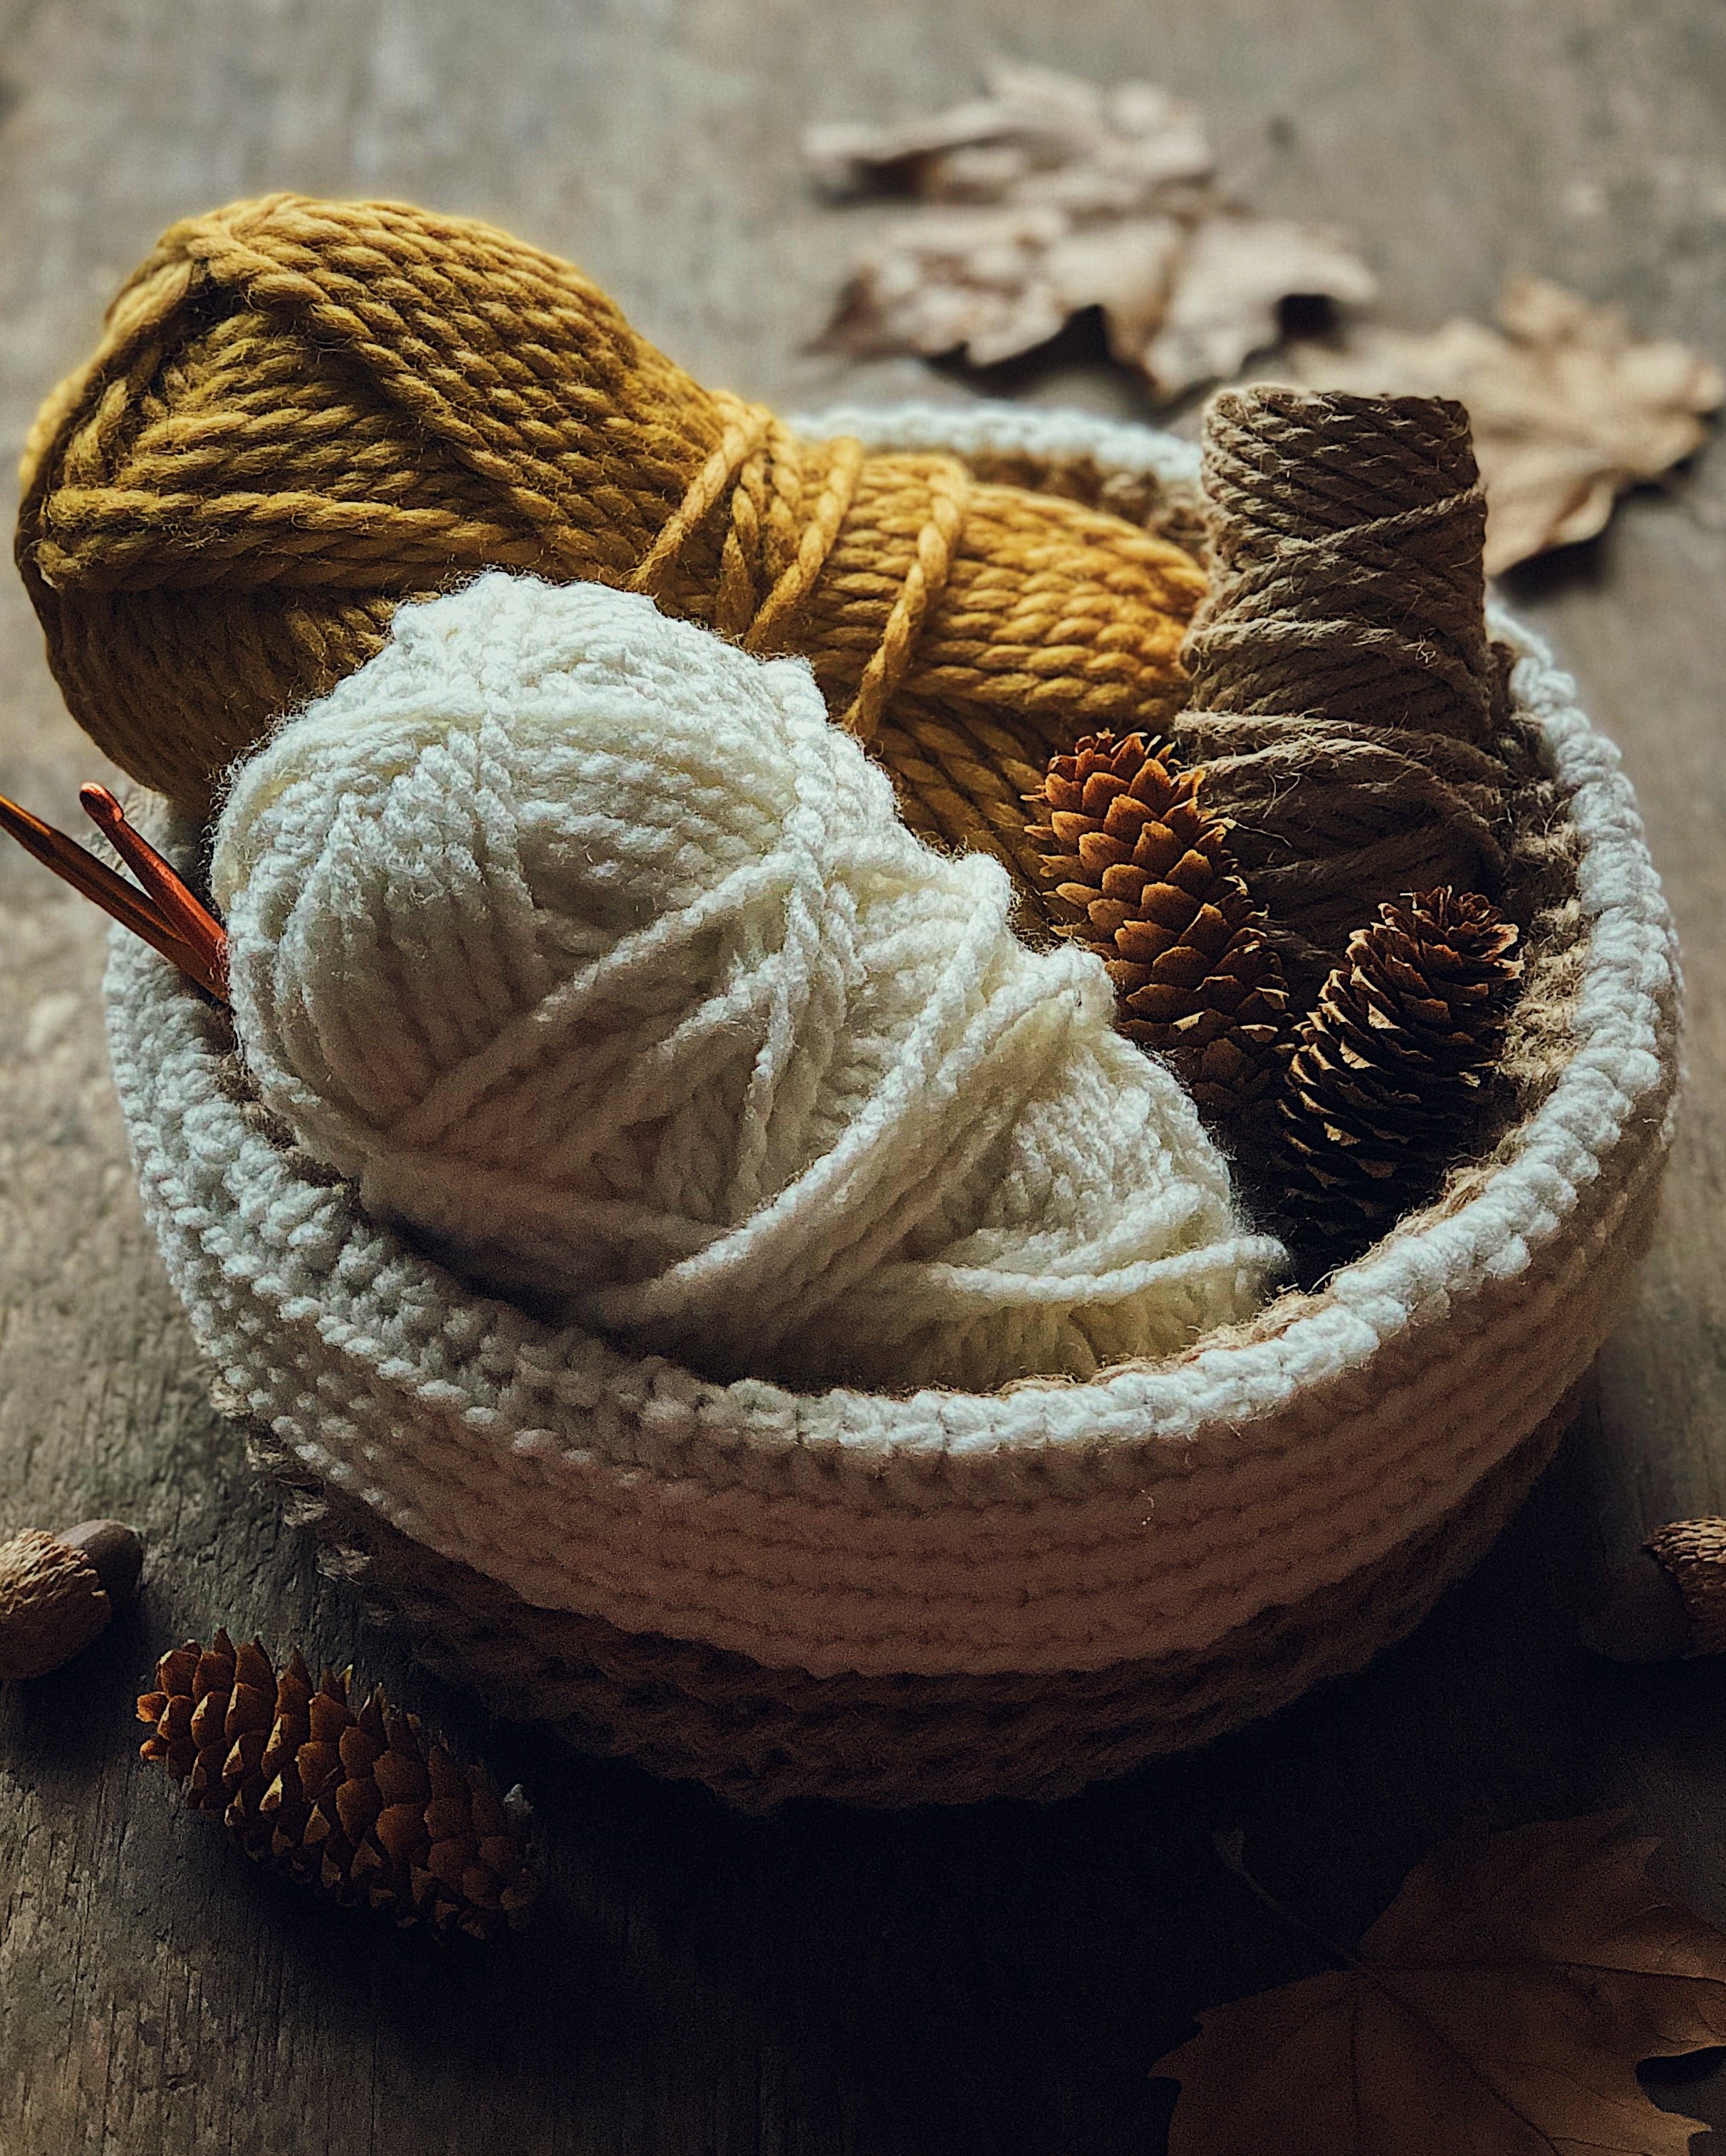 Crochet Kit: Everything You Need For A Successful Crochet Session